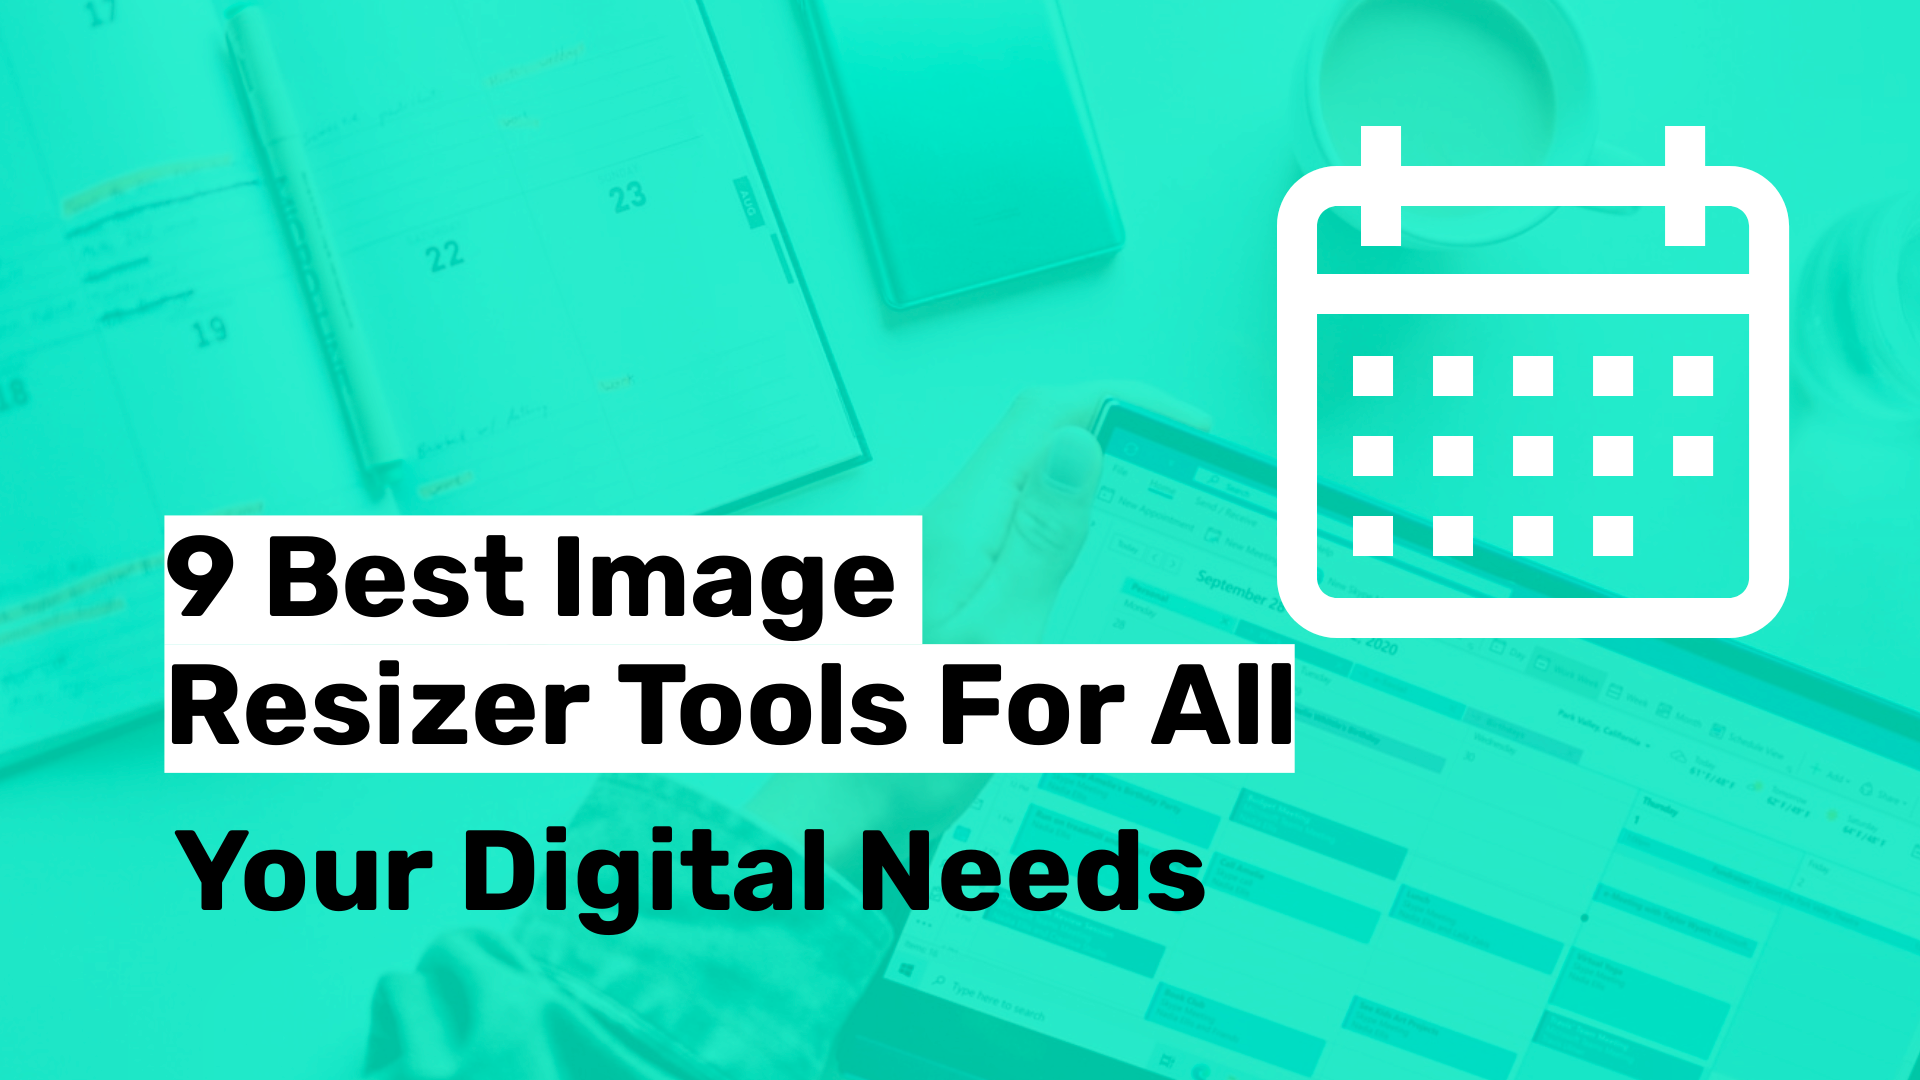 Explore the 9 Best Image Resizer Tools for All Your Digital Needs